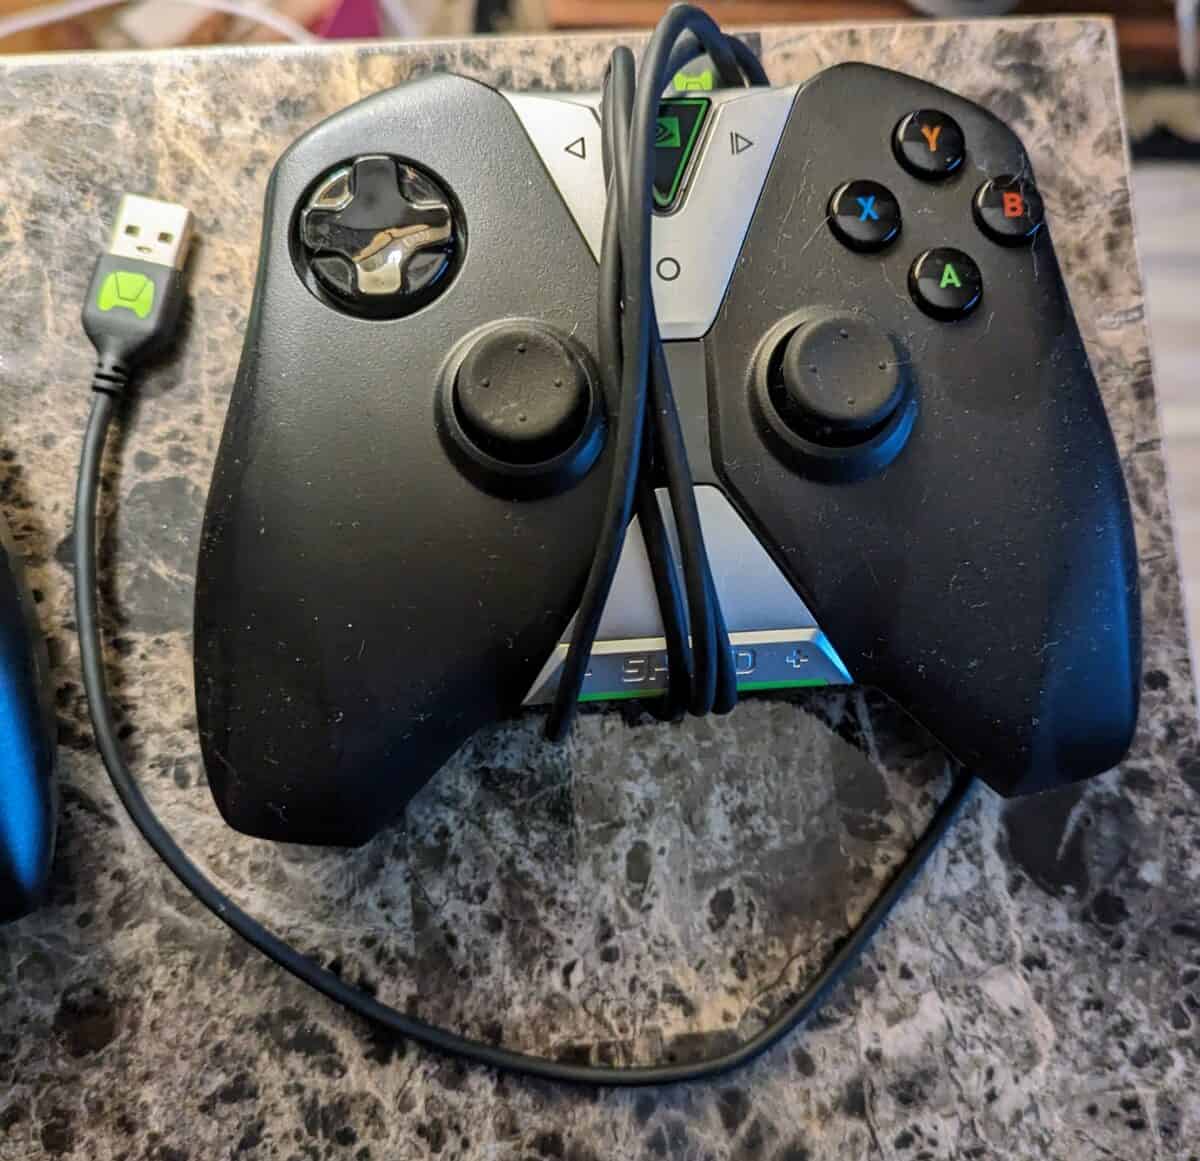 Nvidia Shield controller wrapped up in its chord.